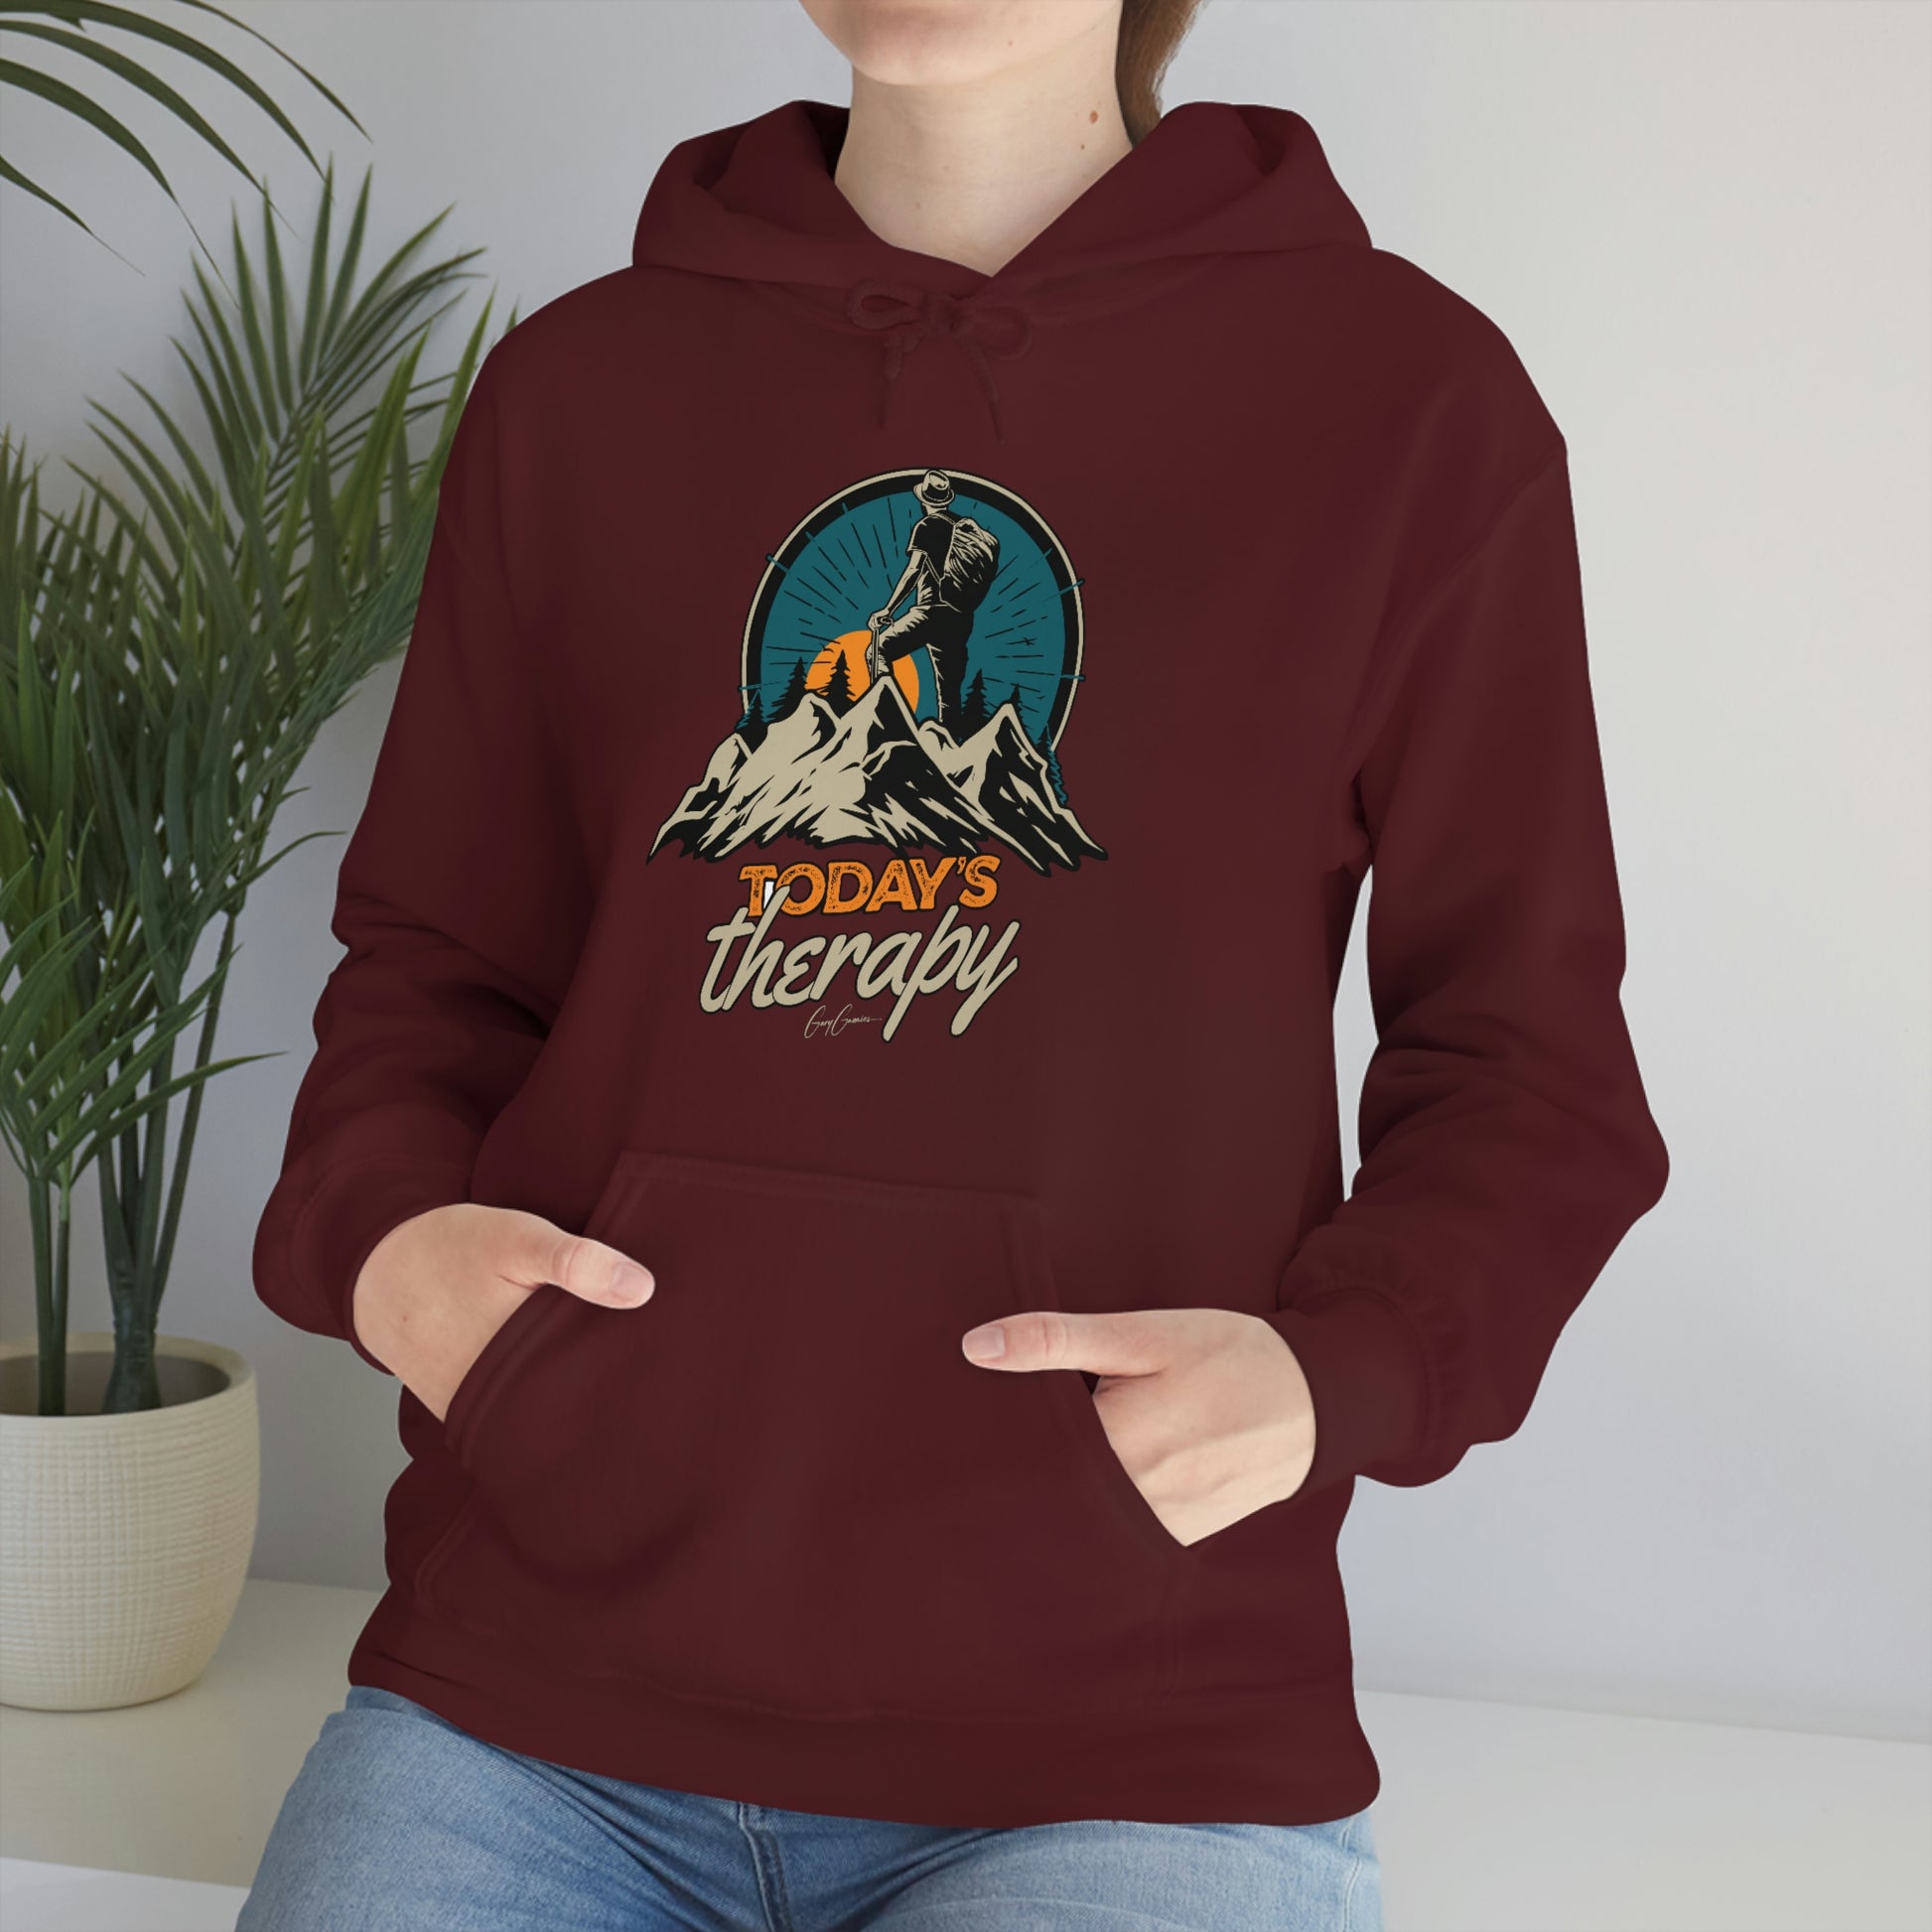 Today's Therapy Hiking Hoodies for Men and Women, Motivational Graphic –  MyWeekendTees